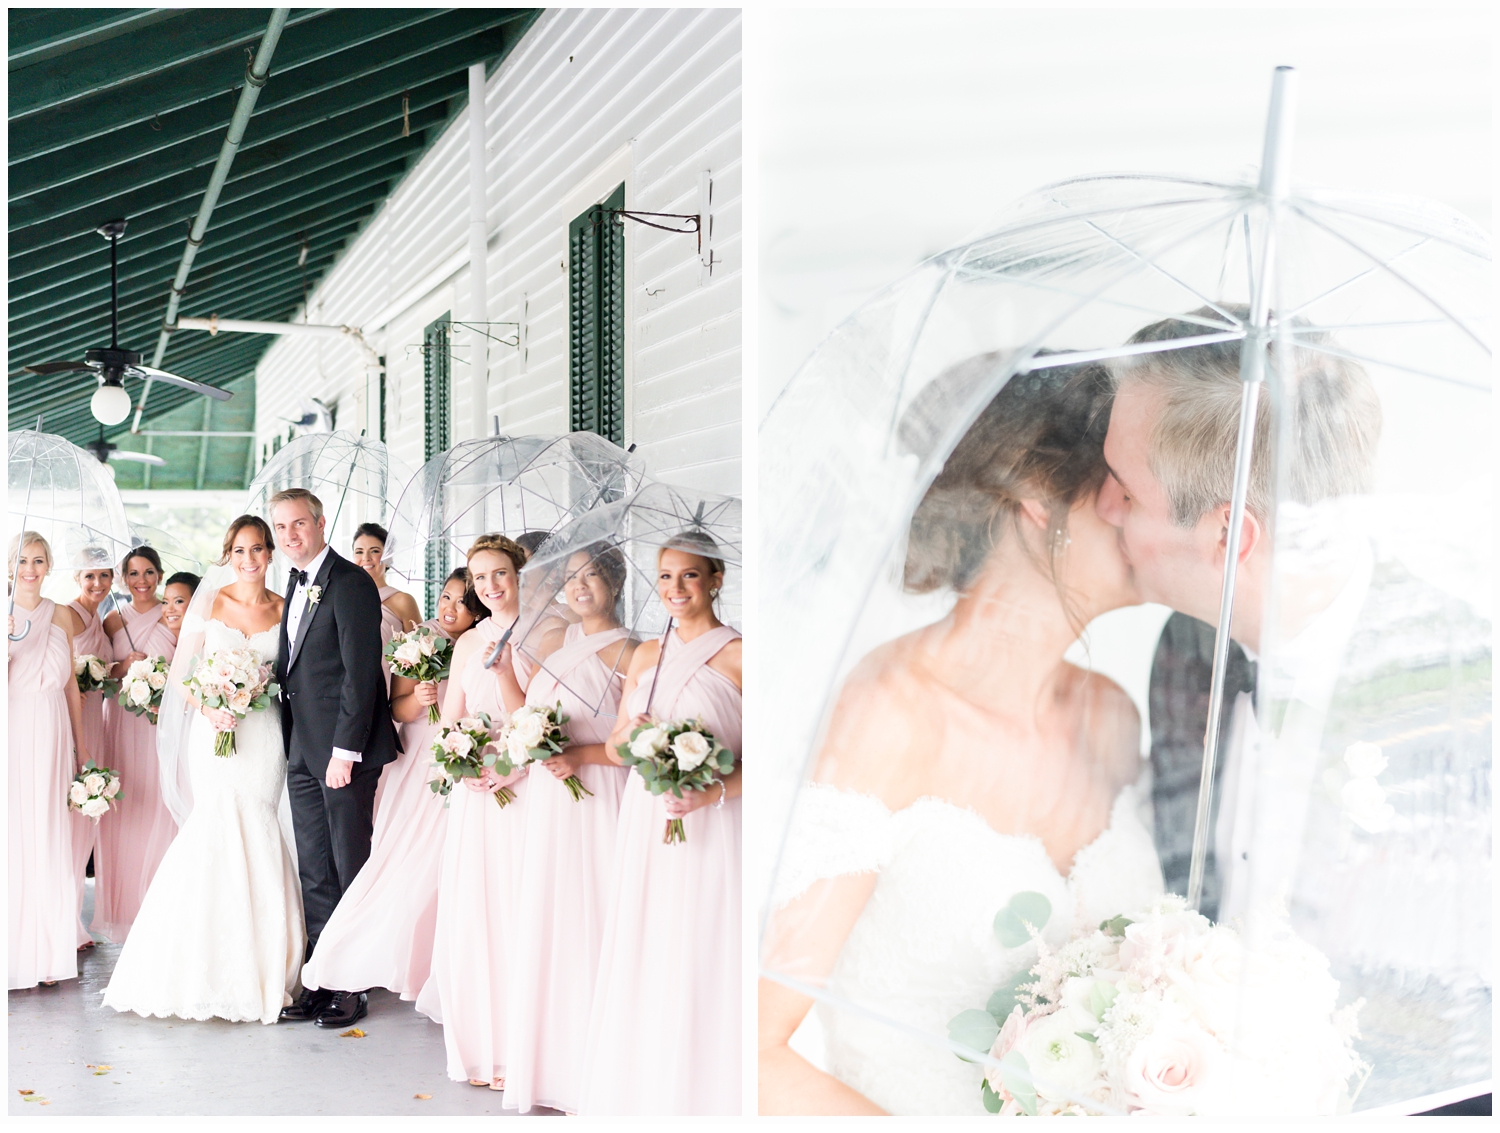 bridal party pictures on porch of parker house spring lake nj